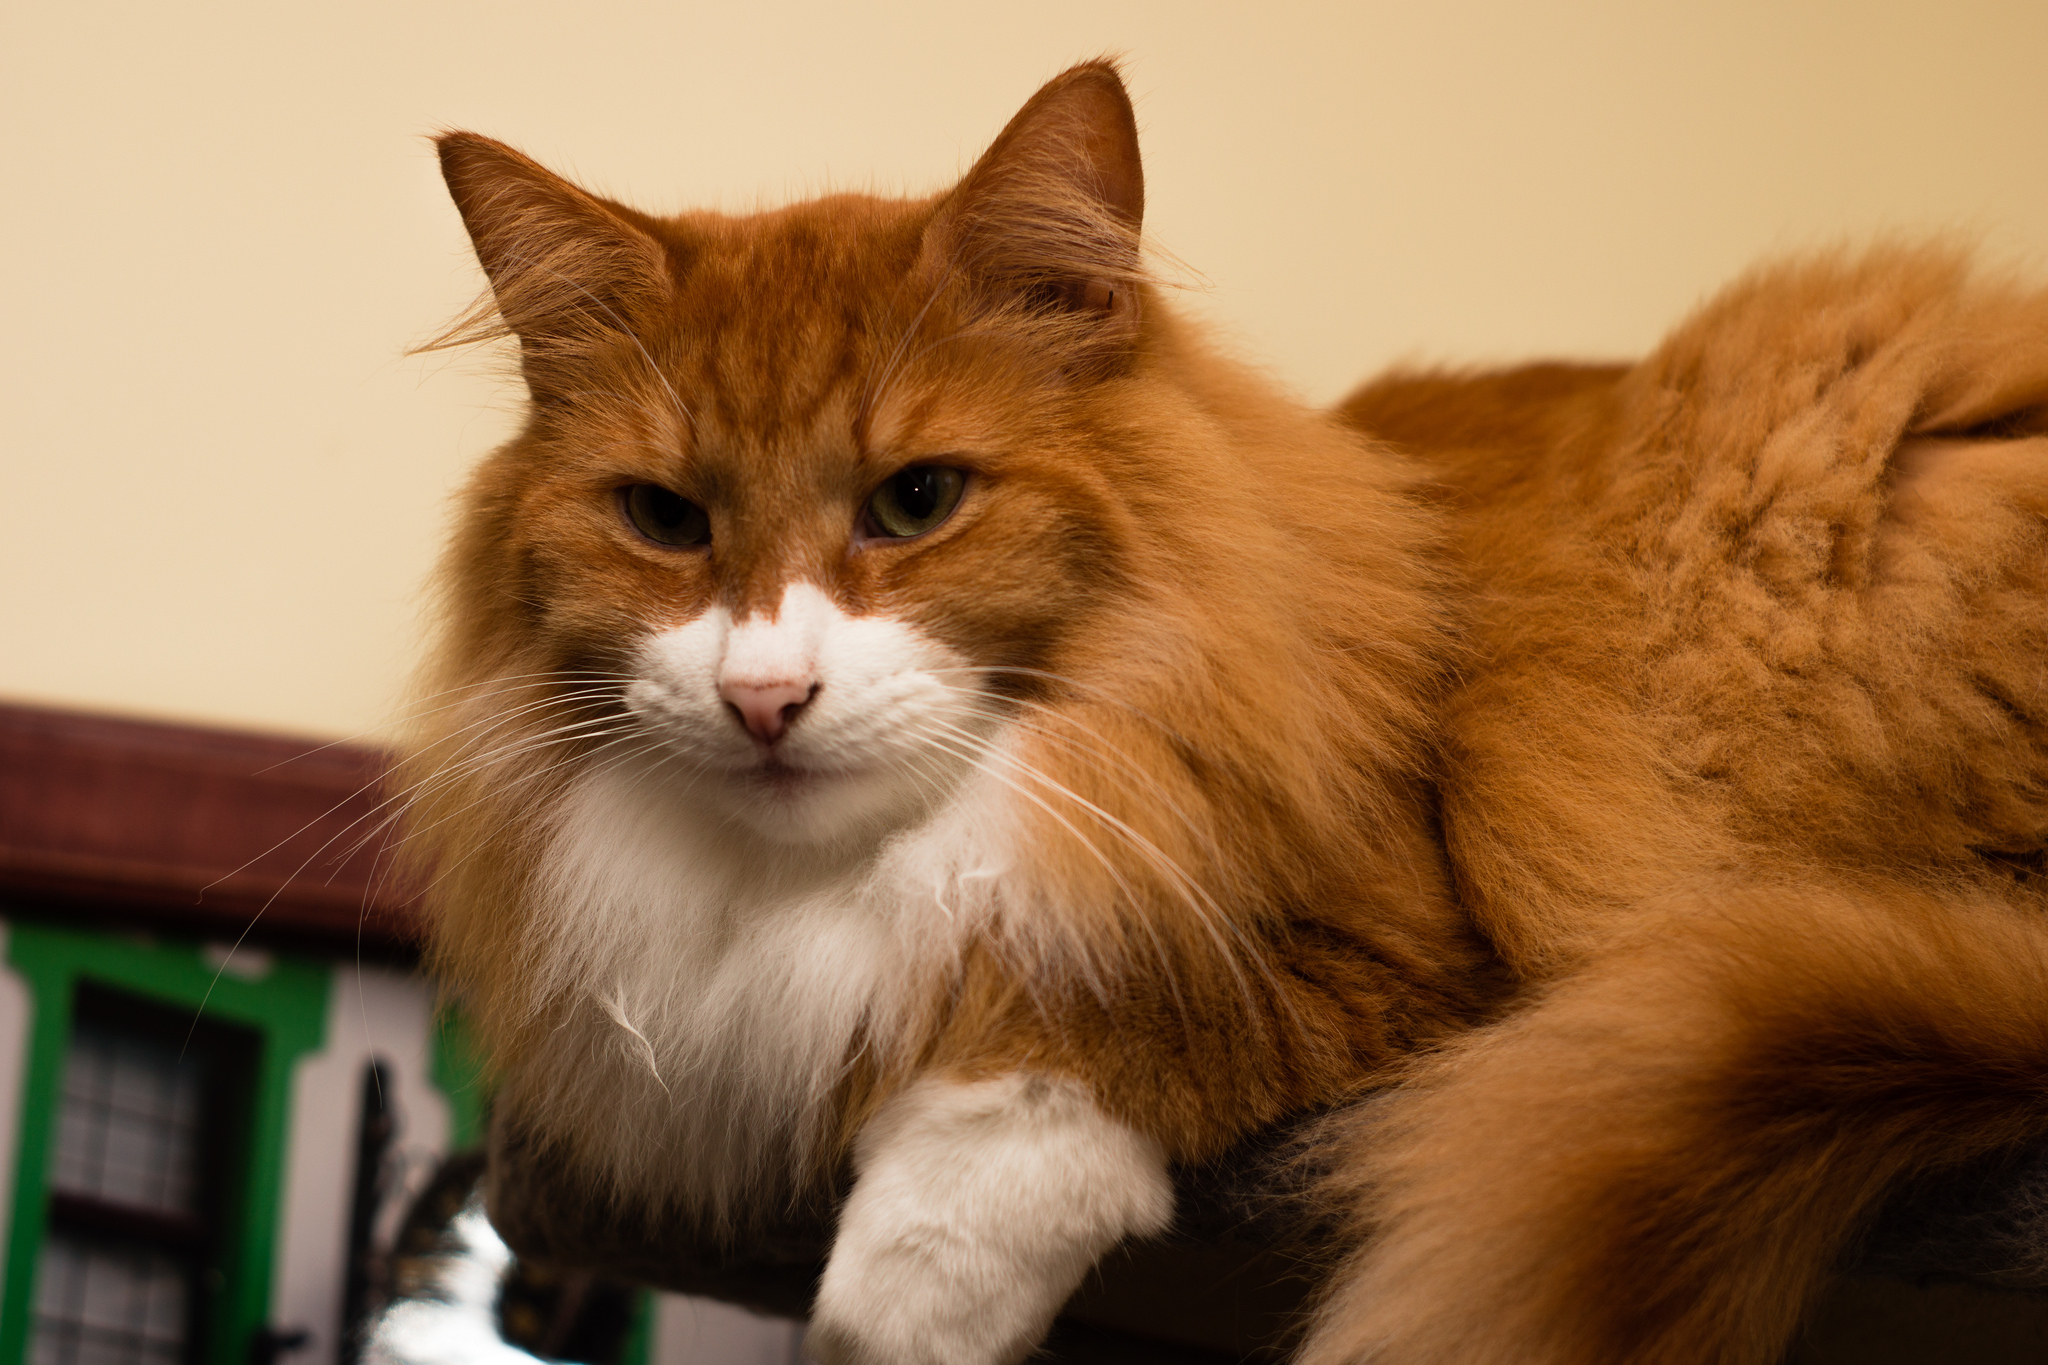 Redhaired Norwegian Forest Cat wallpapers and images wallpapers